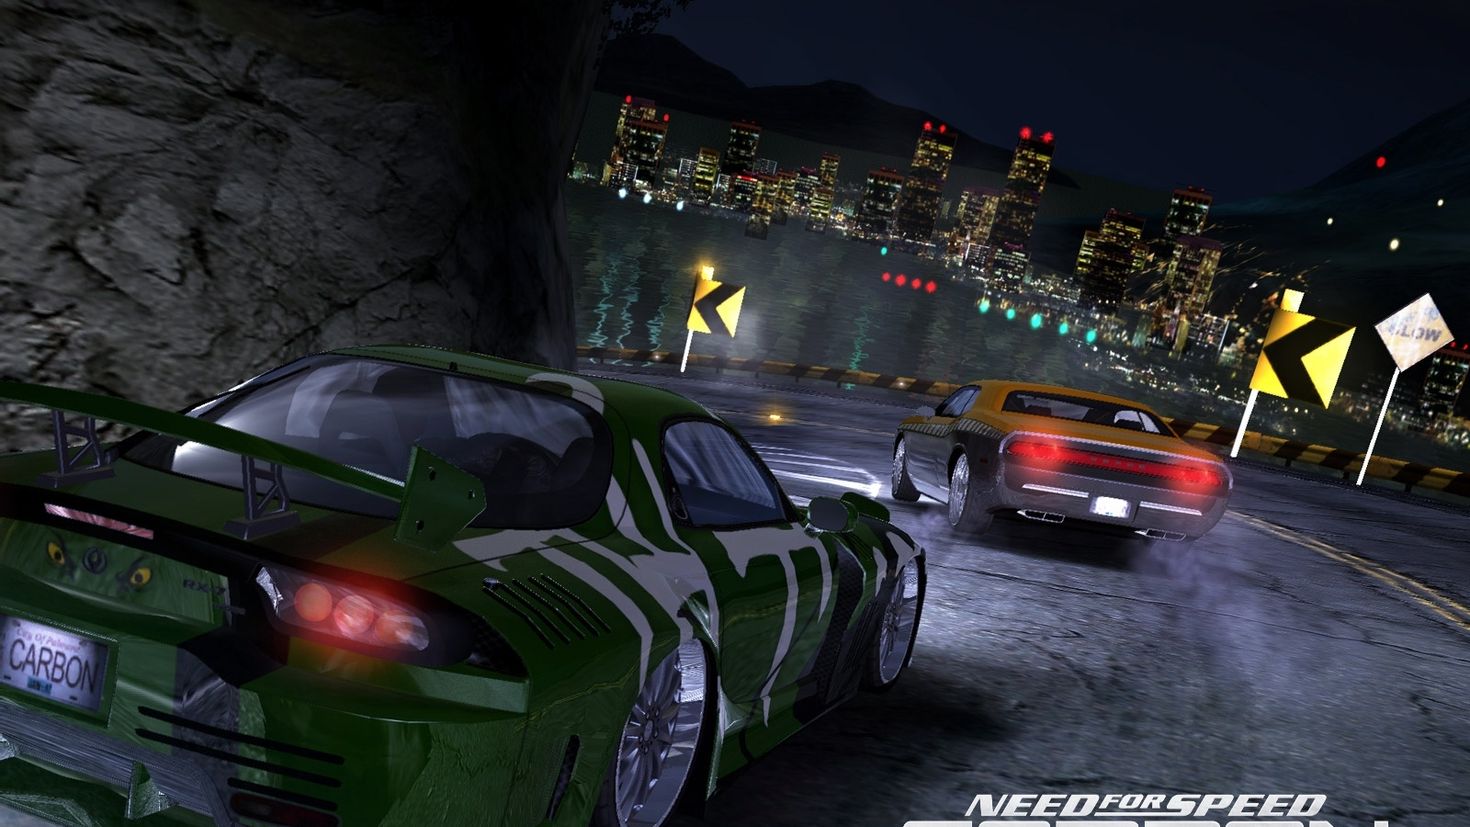 Nfs assemble. Нфс Carbon. Need for Speed карбон 2. Need for Speed: Carbon (2006). Mazda RX-7 Kenji.